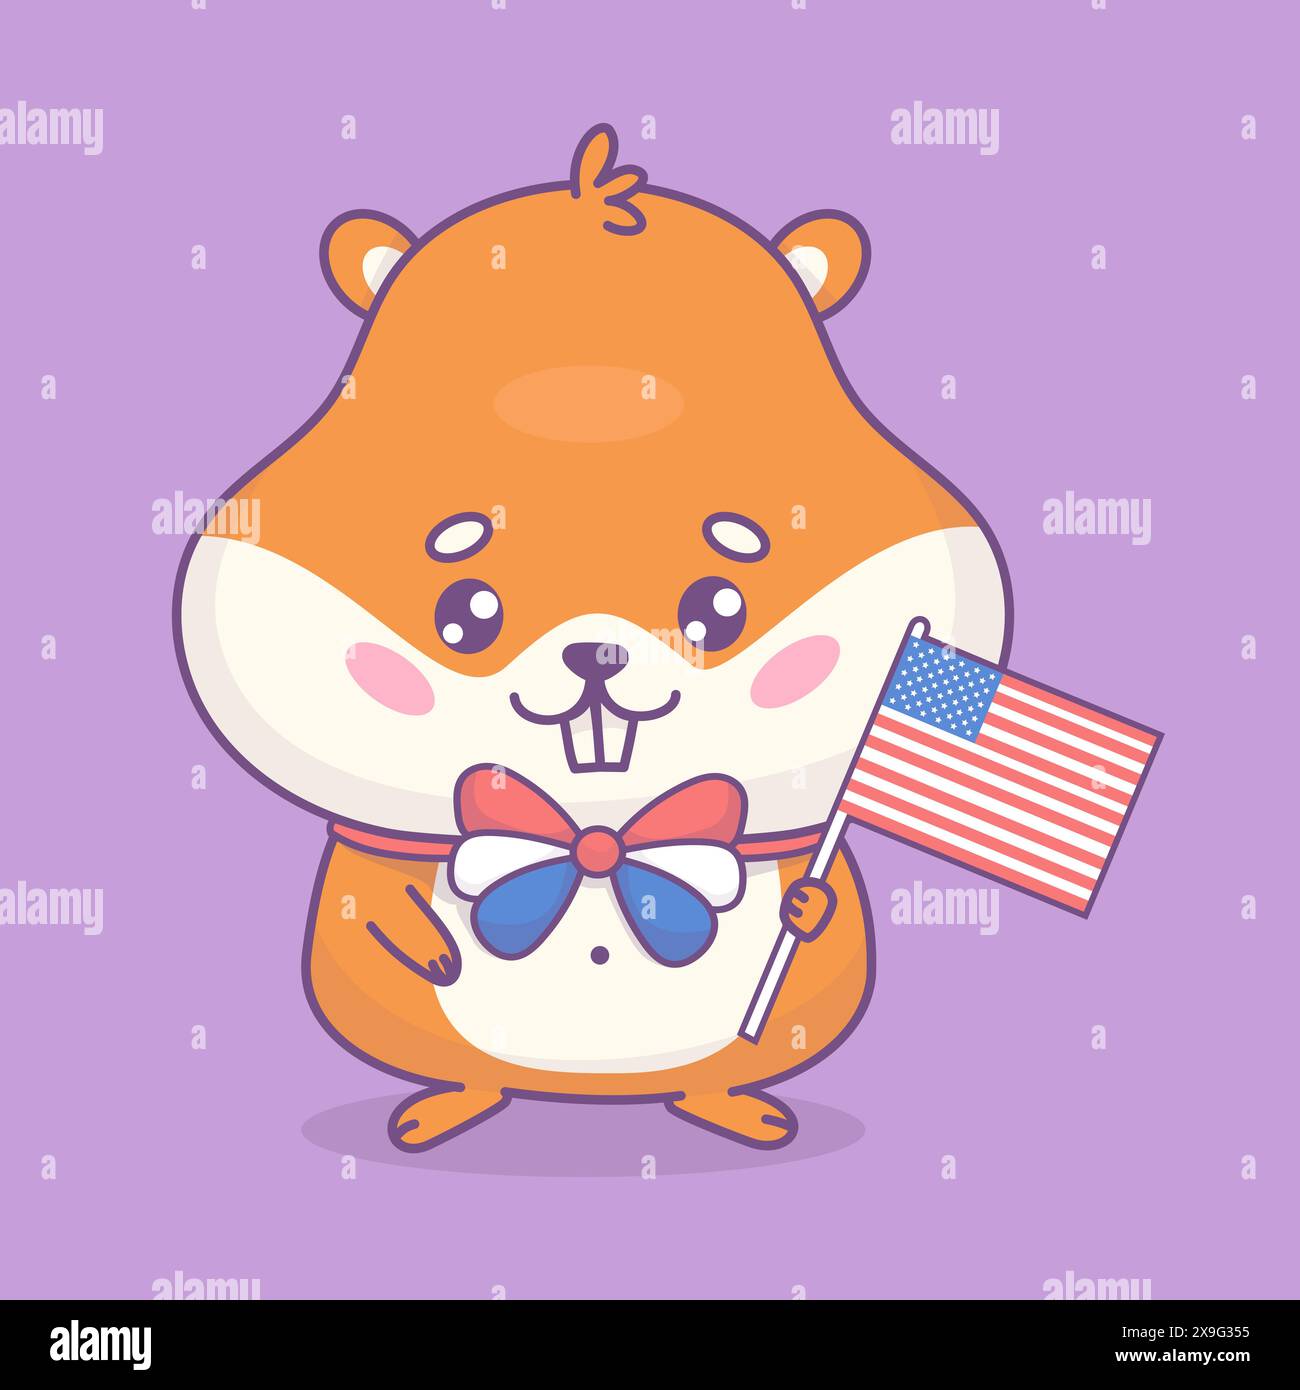 Festive hamster in bow tie with American flag. Cute cartoon animal rodent character. Holiday American Independence Day Fourth of July. Vector illustra Stock Vector